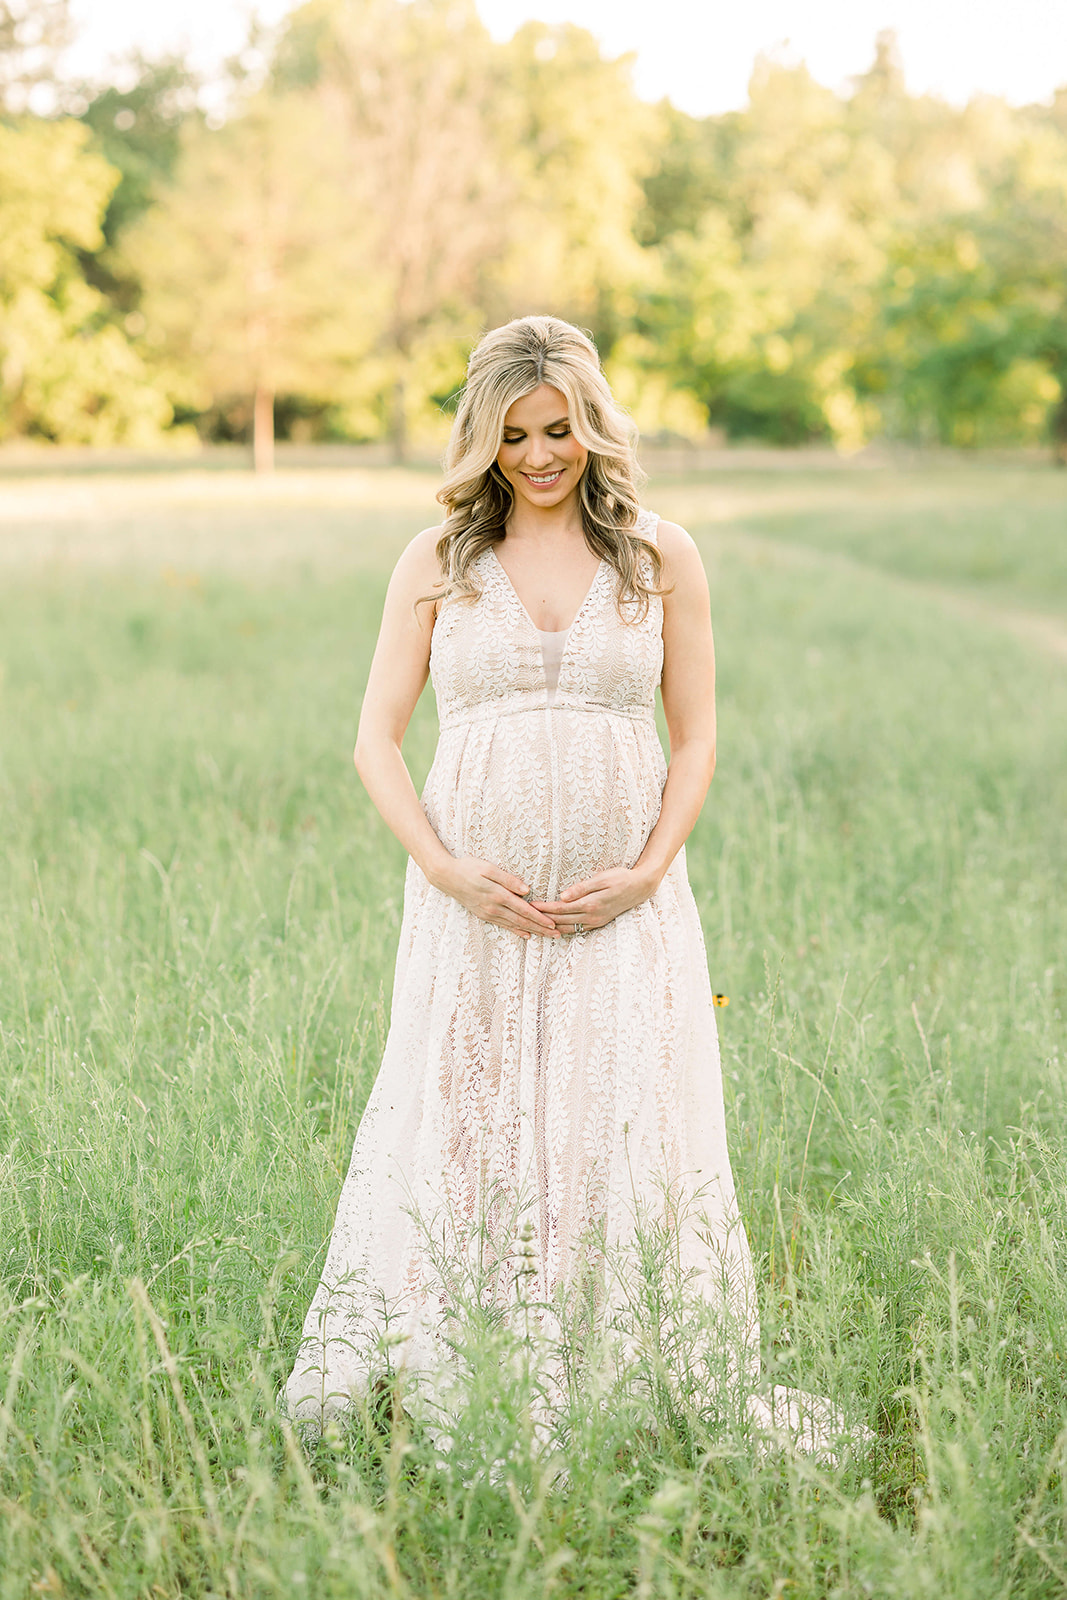 A happy mom to be in a lace maternity gown smiles down at her bump while standing in a field of tall grasses after meeting Houston Midwives